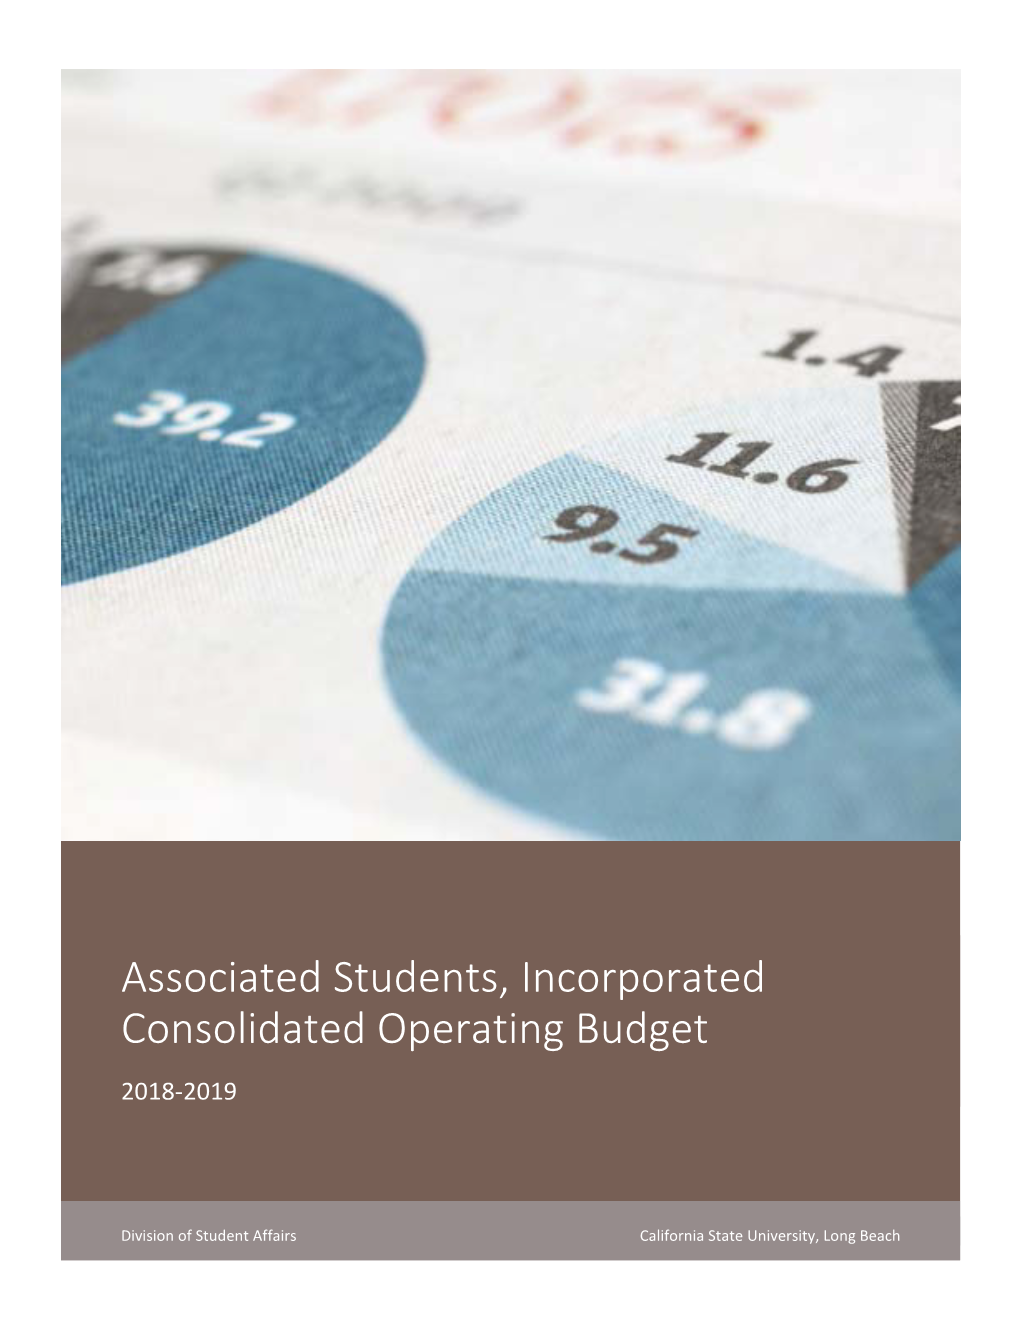 2018-2019 Consolidated Operating Budget for Associated Students, Incorporated of California State University, Long Beach (ASI)